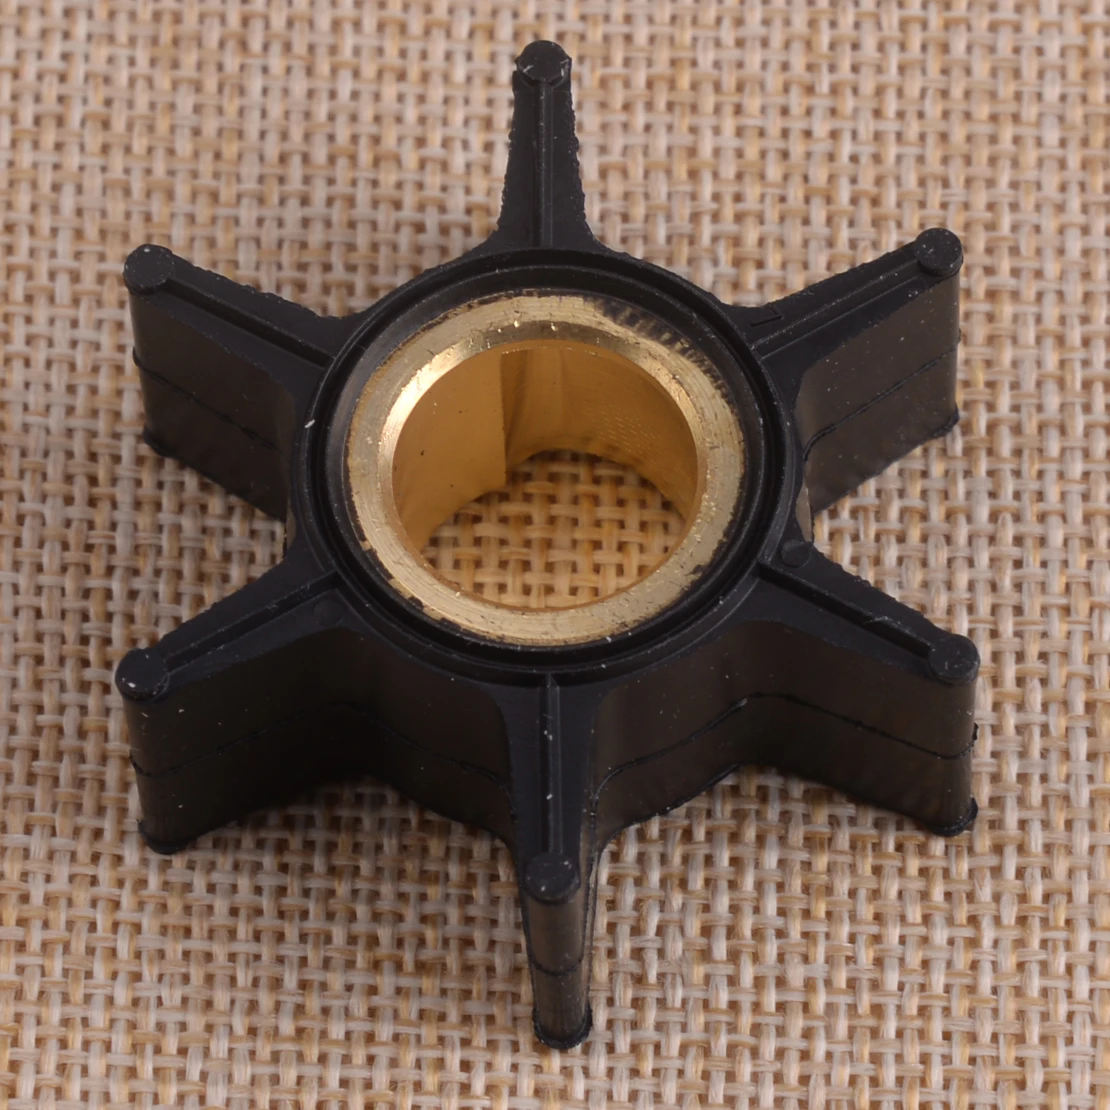 

CITALL 6 Blades Water Pump Impeller Black Rubber 395289 18-3051 Fit For Johnson Evinrude 20/25/30/35HP 2 stroke Outboard Motor